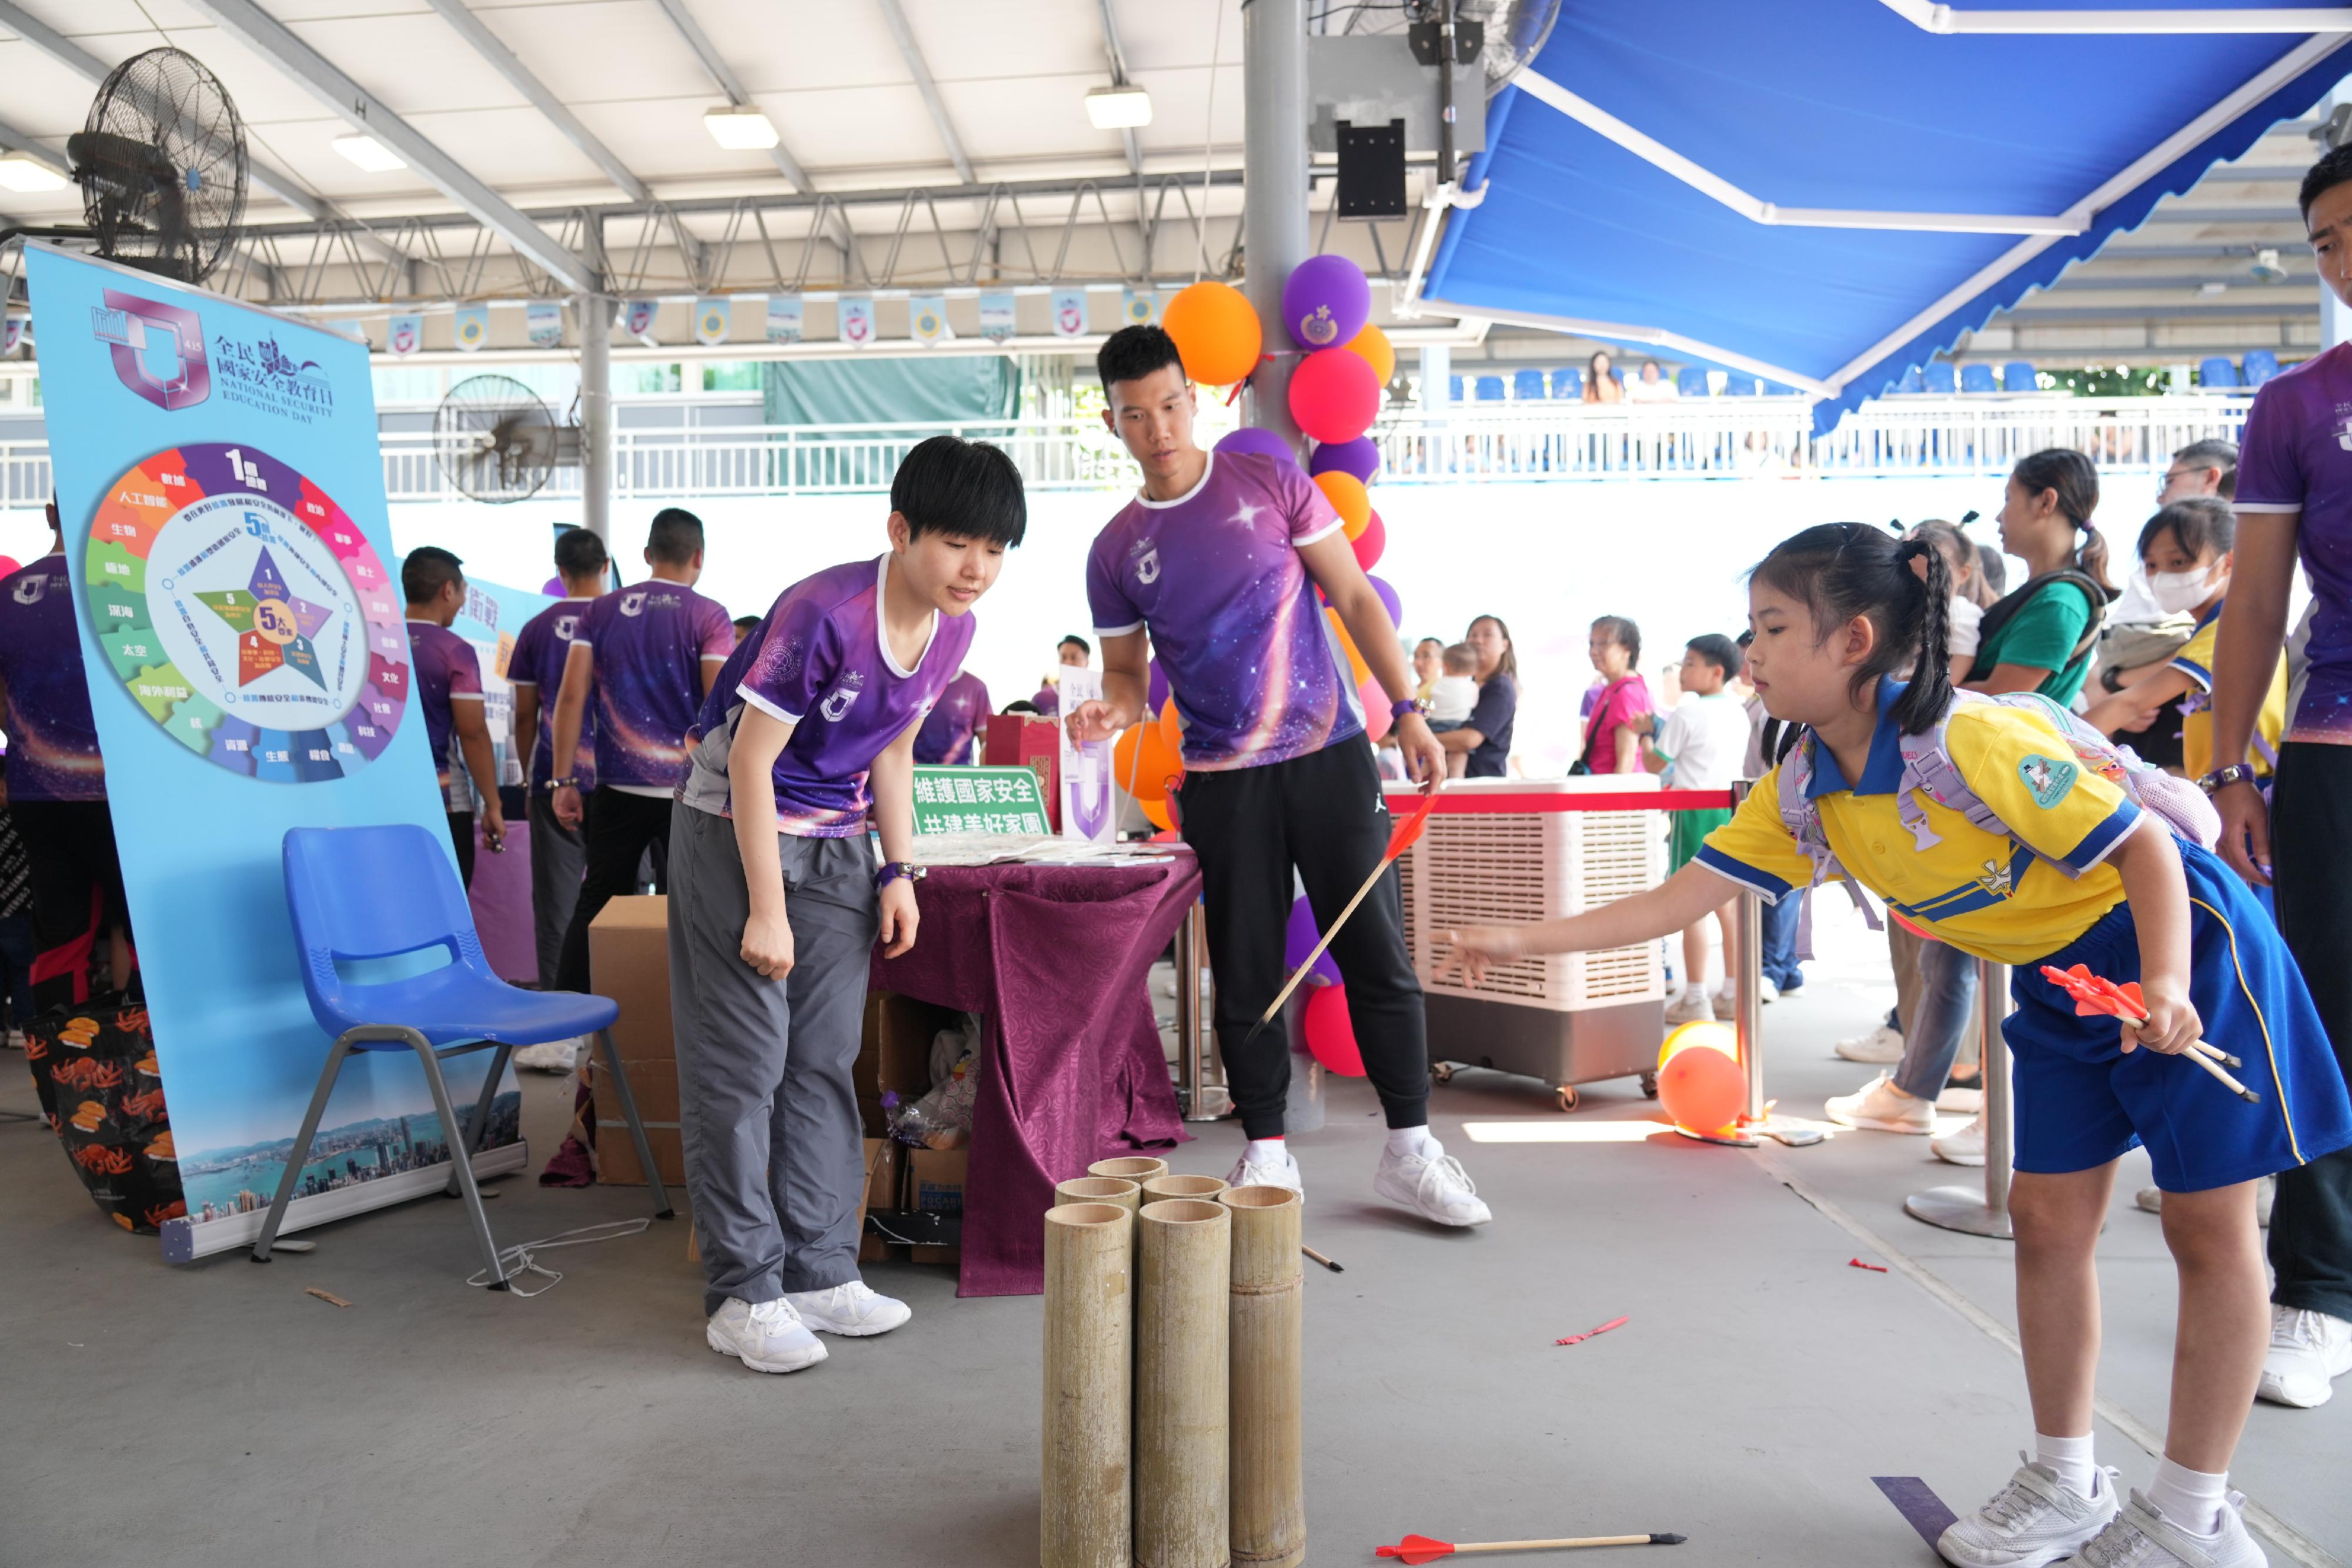 To support National Security Education Day on April 15, the Correctional Services Department held an open day at the Hong Kong Correctional Services Academy today (April 13) to raise public awareness of national security and enhance public understanding of its work in safeguarding national security. Photo shows a visitor taking part in a booth game.